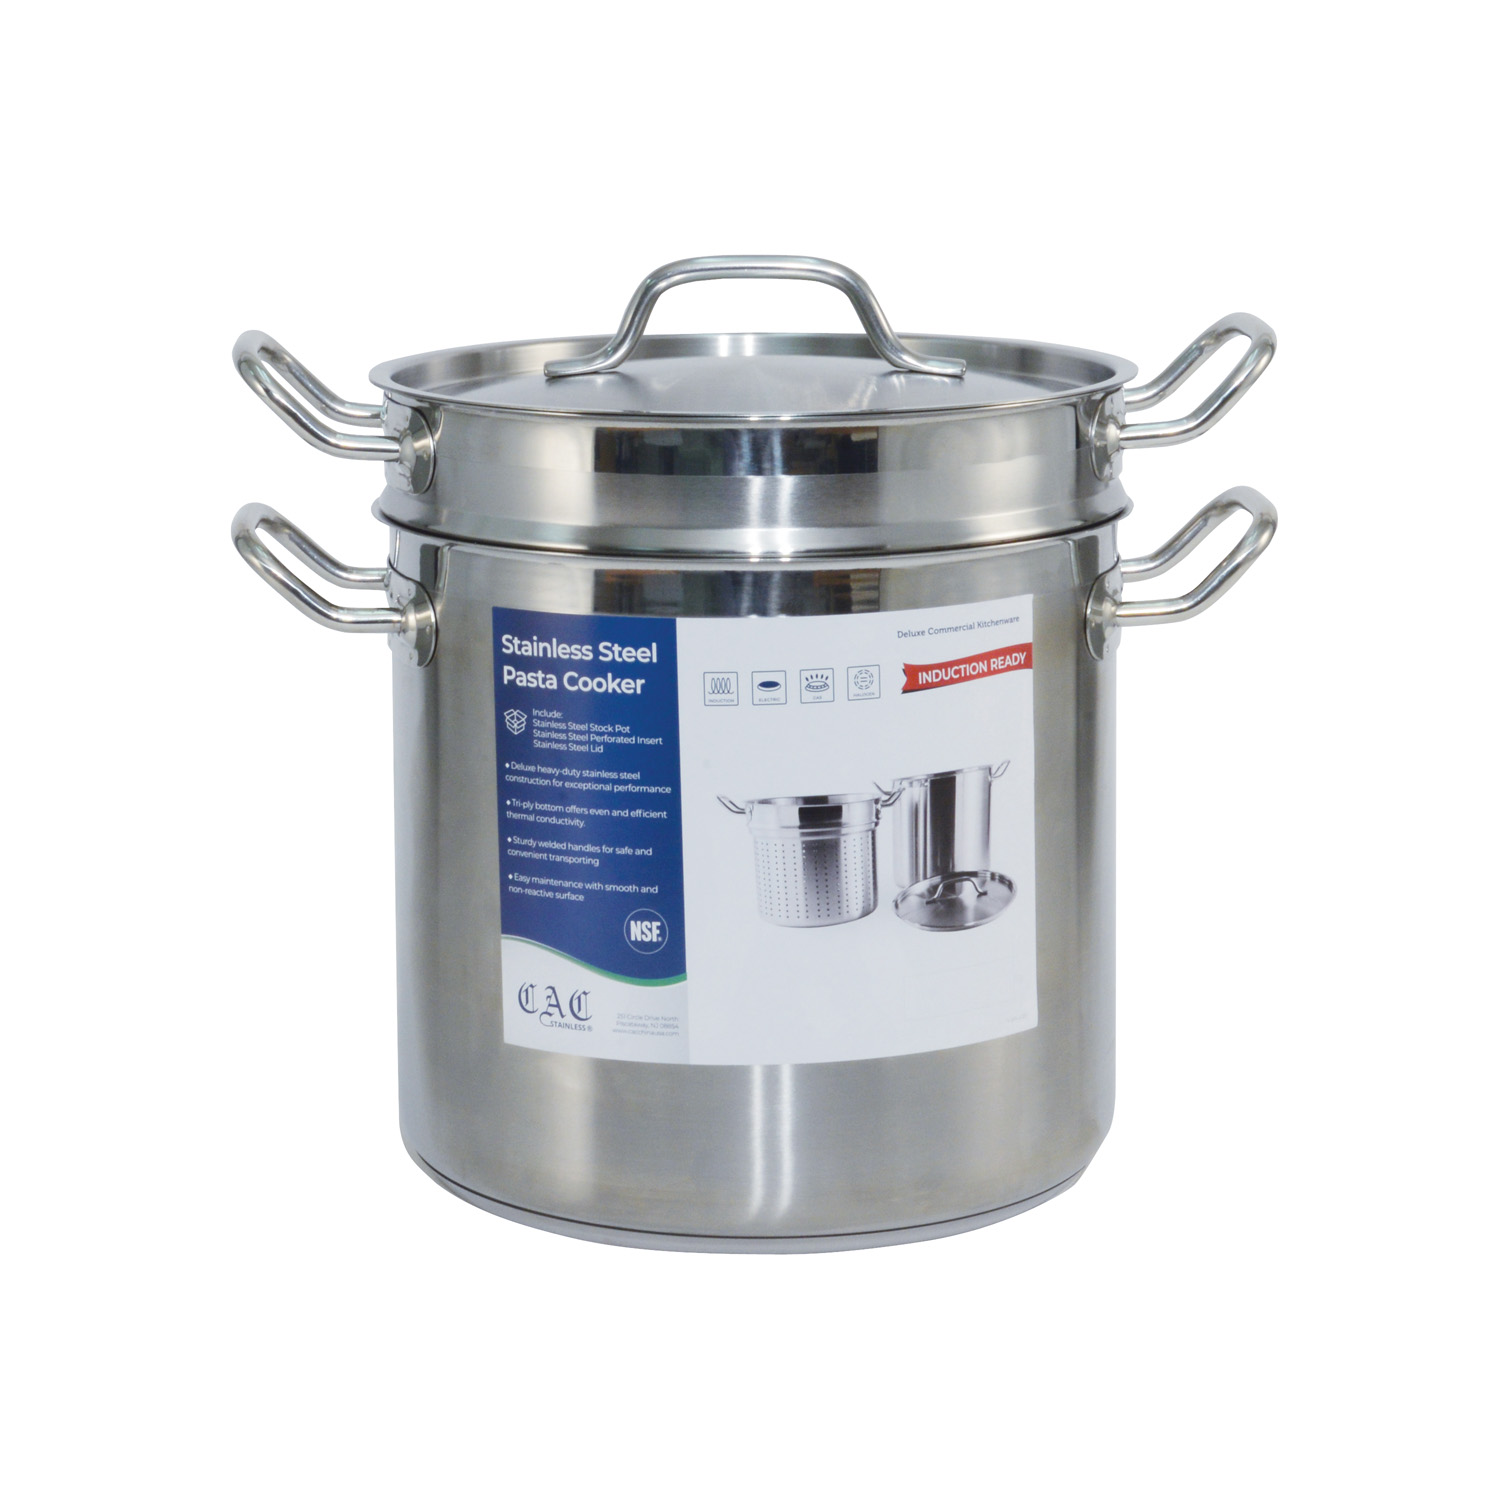 CAC China SPDB-12 Stainless Steel Pasta Cooker 12 Qt.